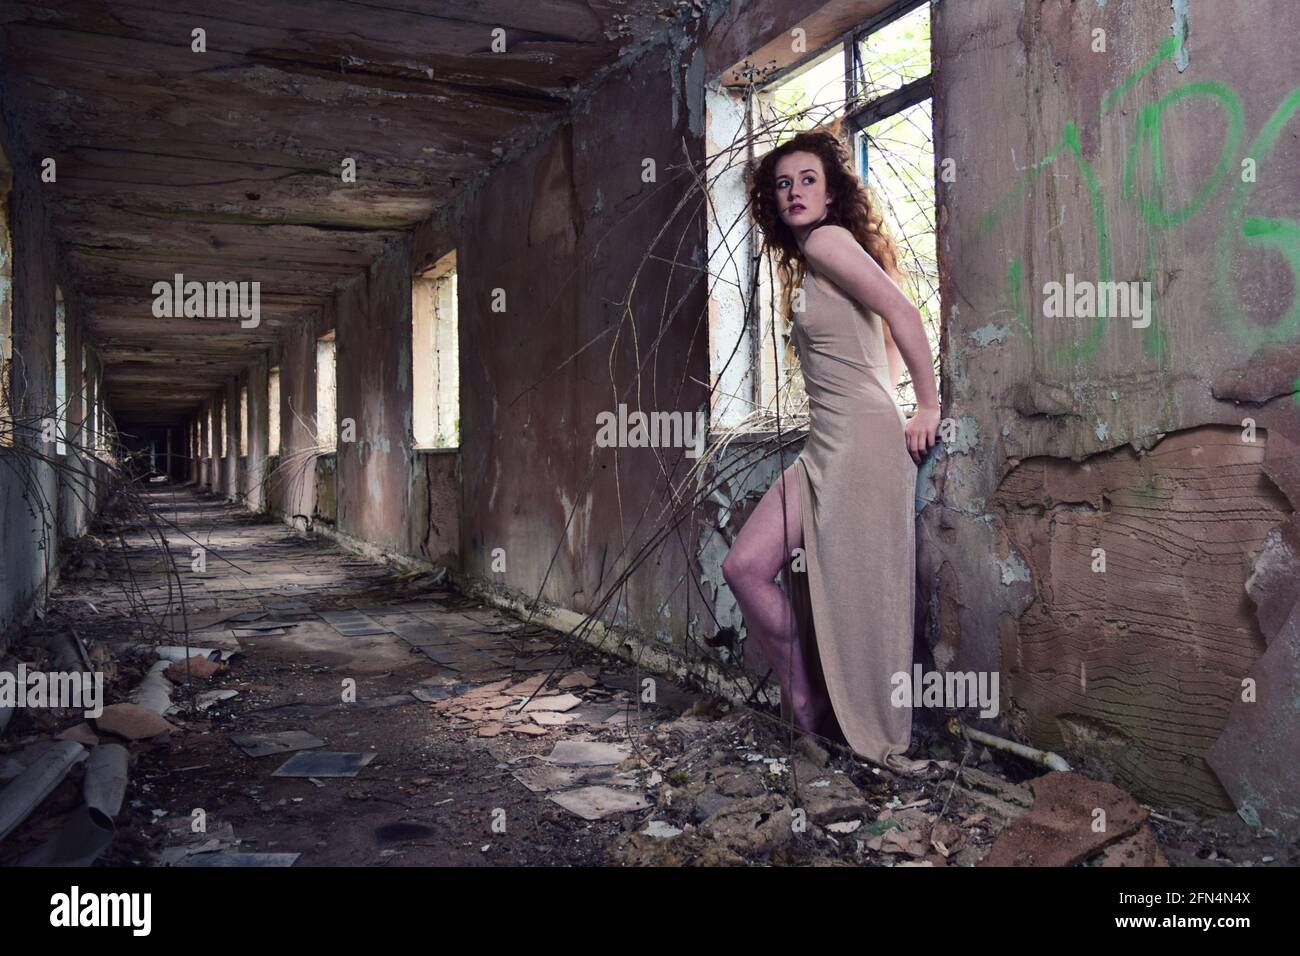 Women in abandoned building Stock Photo